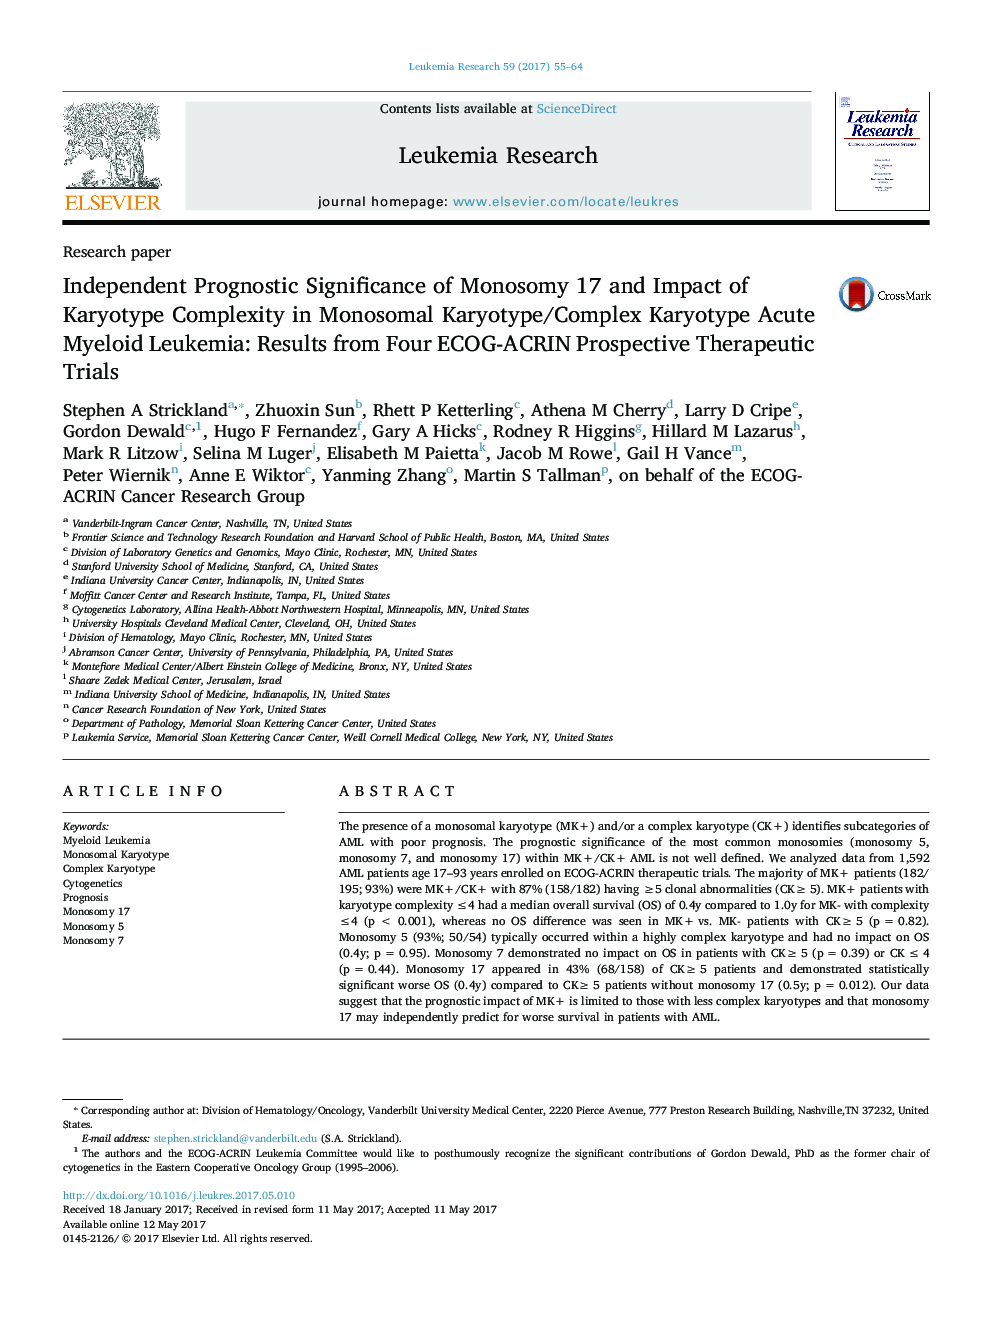 Research paperIndependent Prognostic Significance of Monosomy 17 and Impact of Karyotype Complexity in Monosomal Karyotype/Complex Karyotype Acute Myeloid Leukemia: Results from Four ECOG-ACRIN Prospective Therapeutic Trials